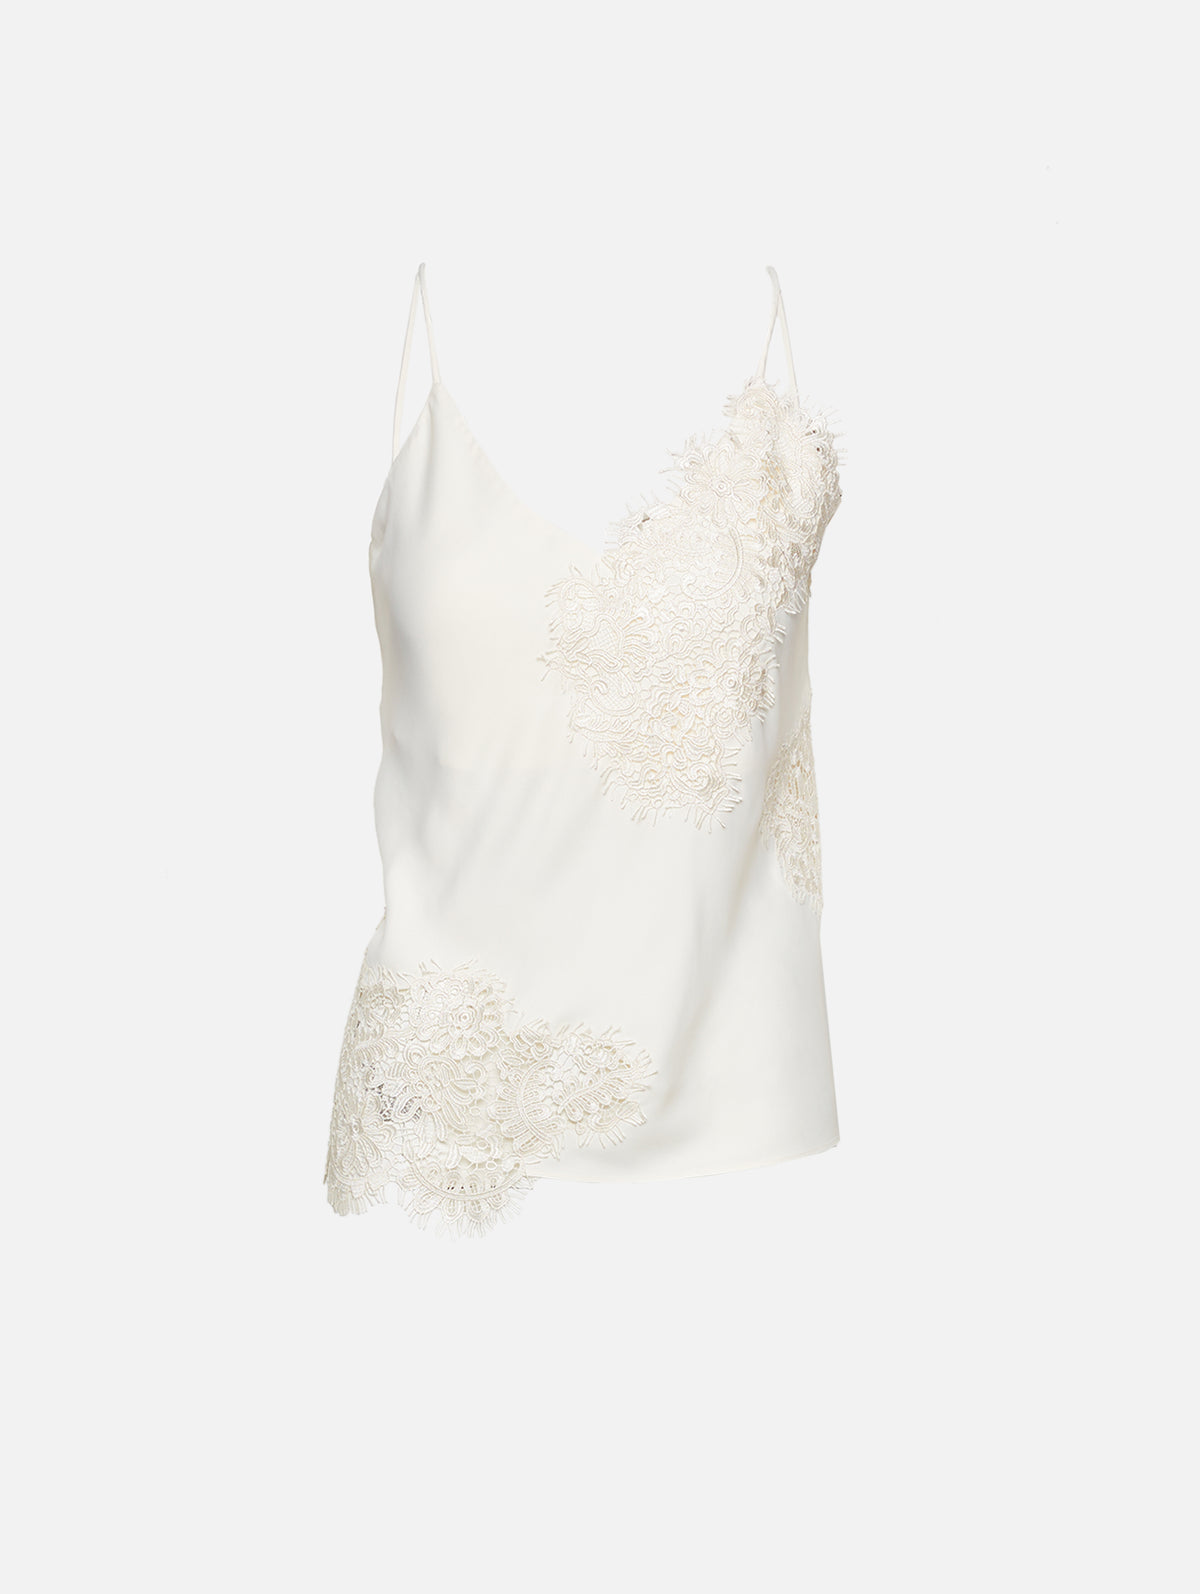 view 1 - Lace Camisole Top